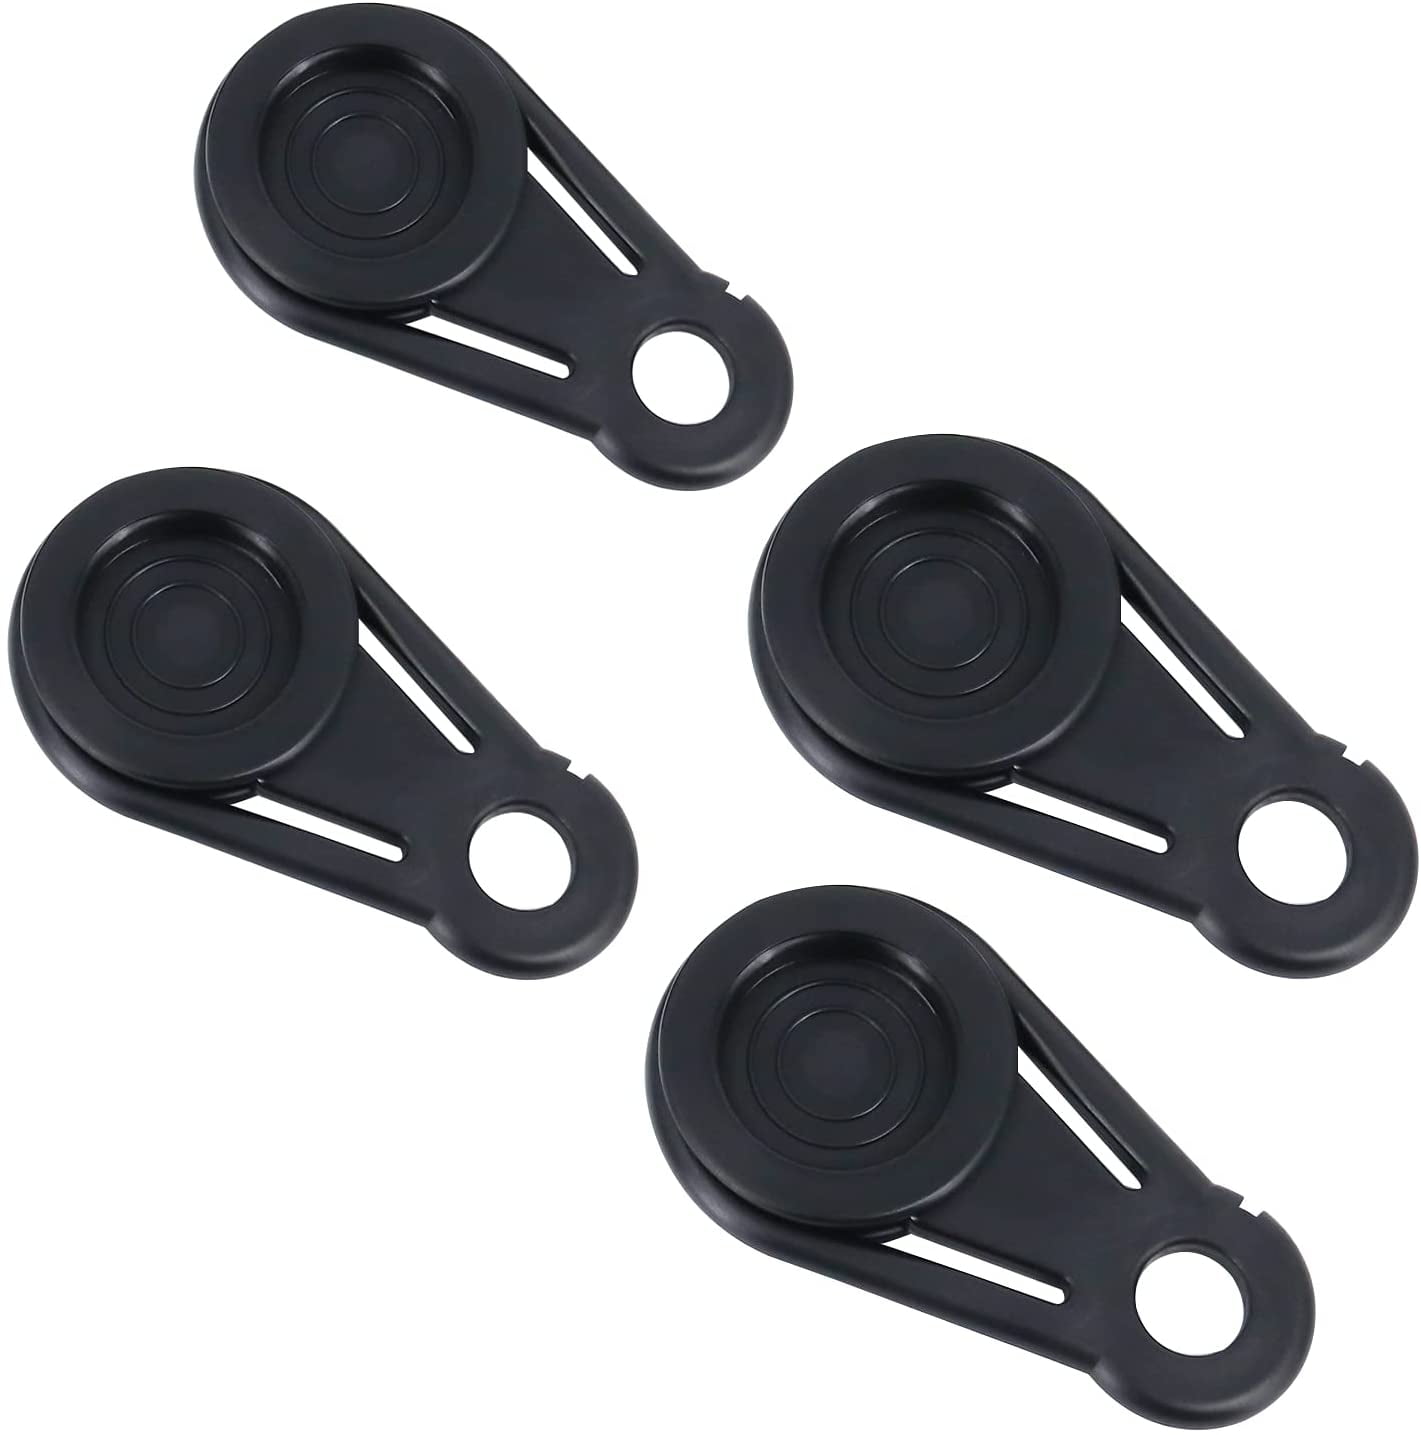 New Byers' Super Snap Reusable Grommets For Tarps Portable Camping